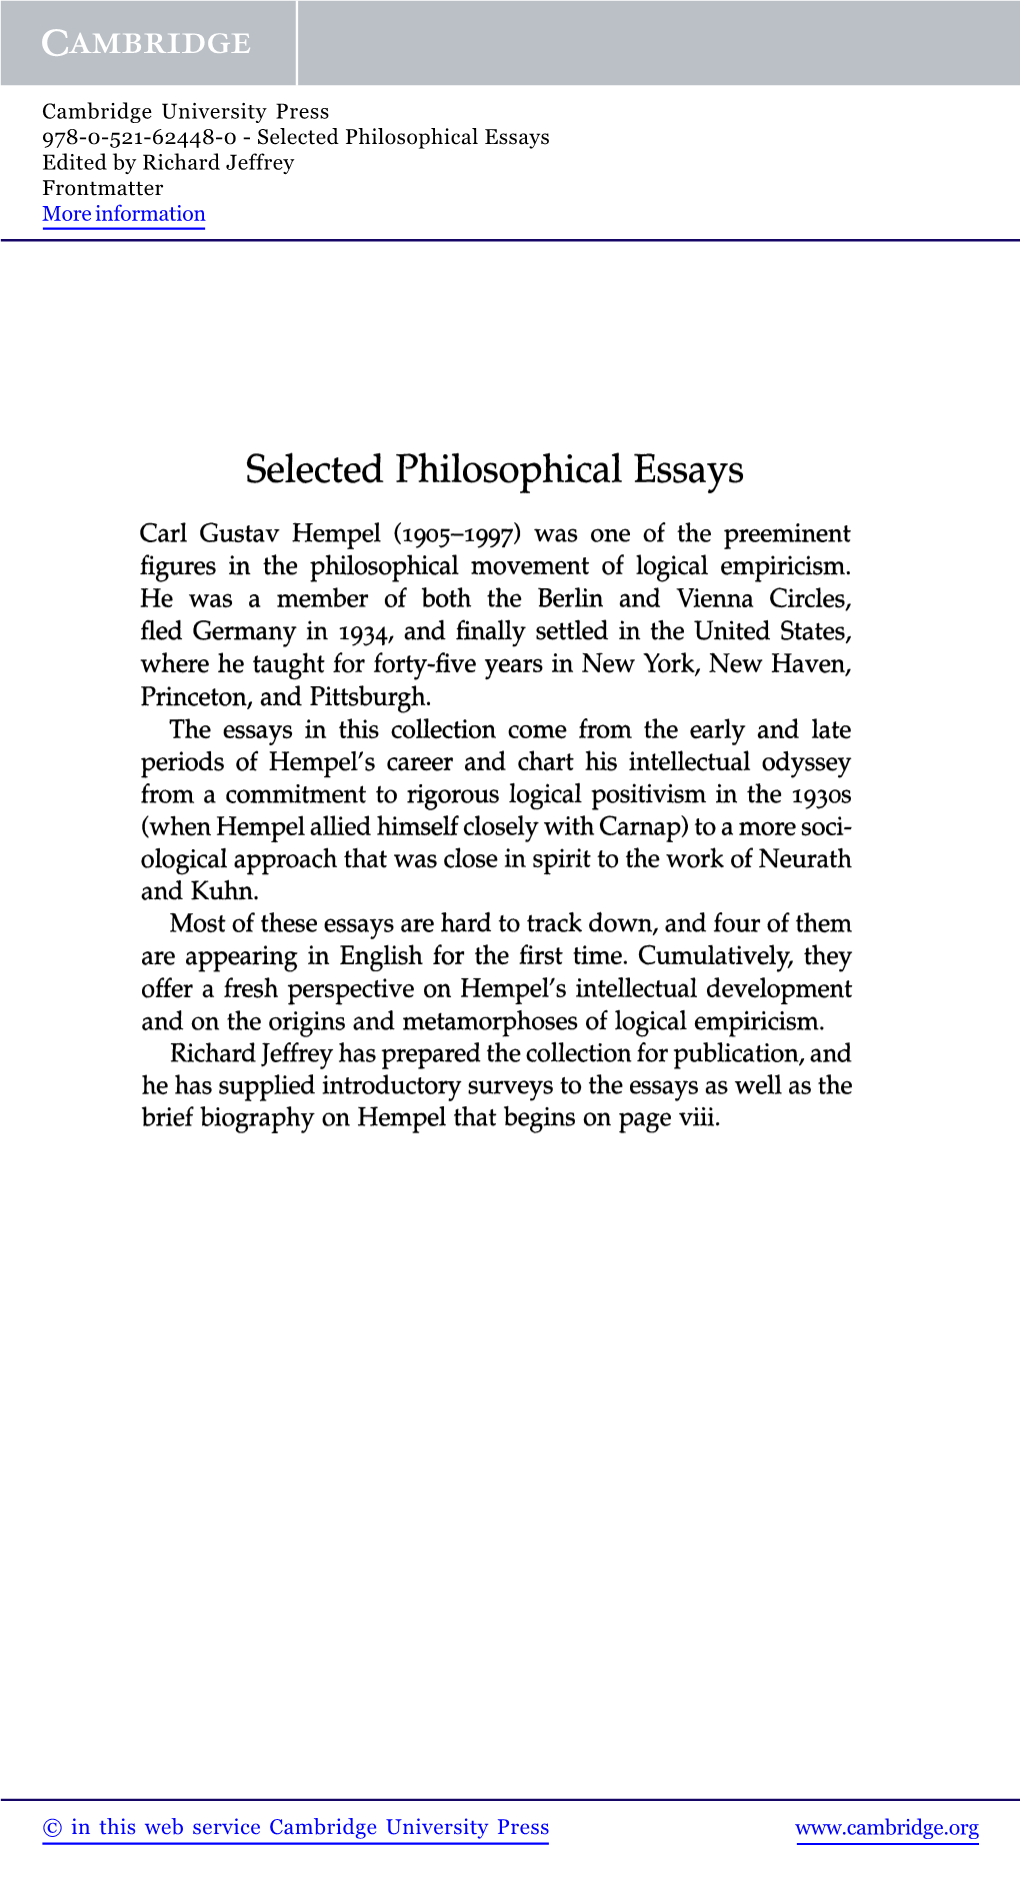 Selected Philosophical Essays Edited by Richard Jeffrey Frontmatter More Information